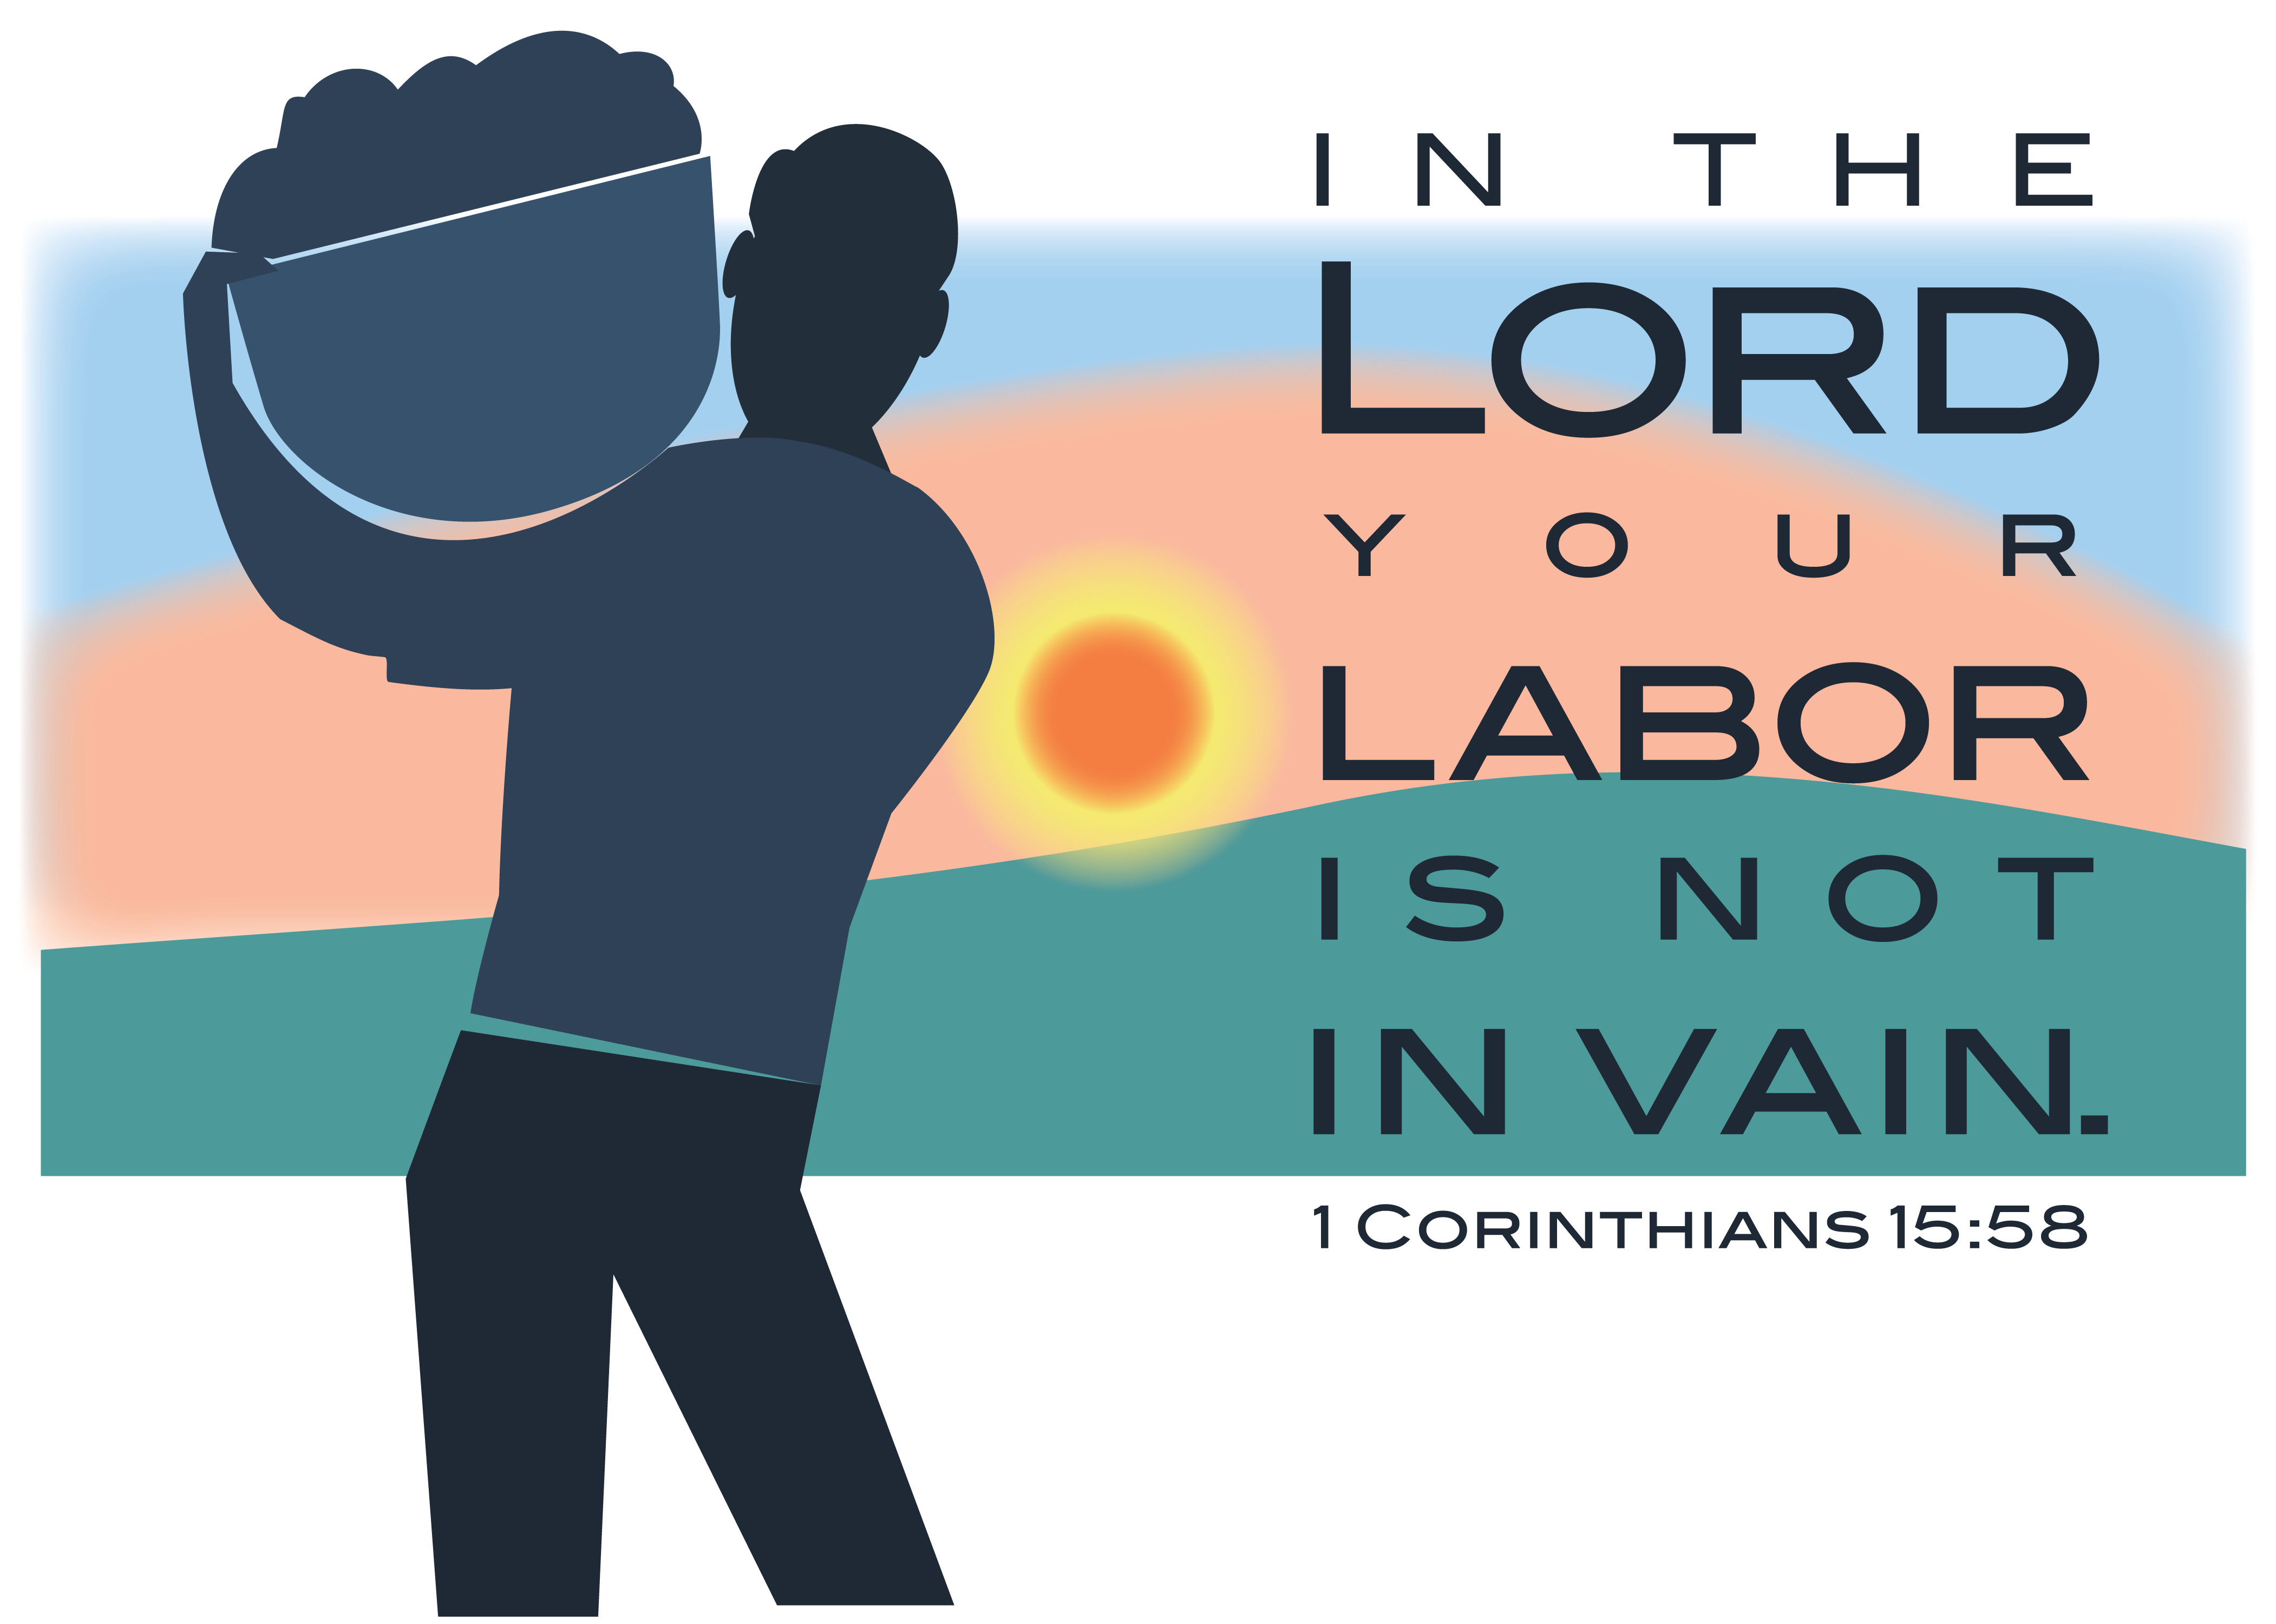 sunrise over a hill with silhouette of man carring a full basket of goods with text in the lord your labor is not in vain 1 corinthians 15:58